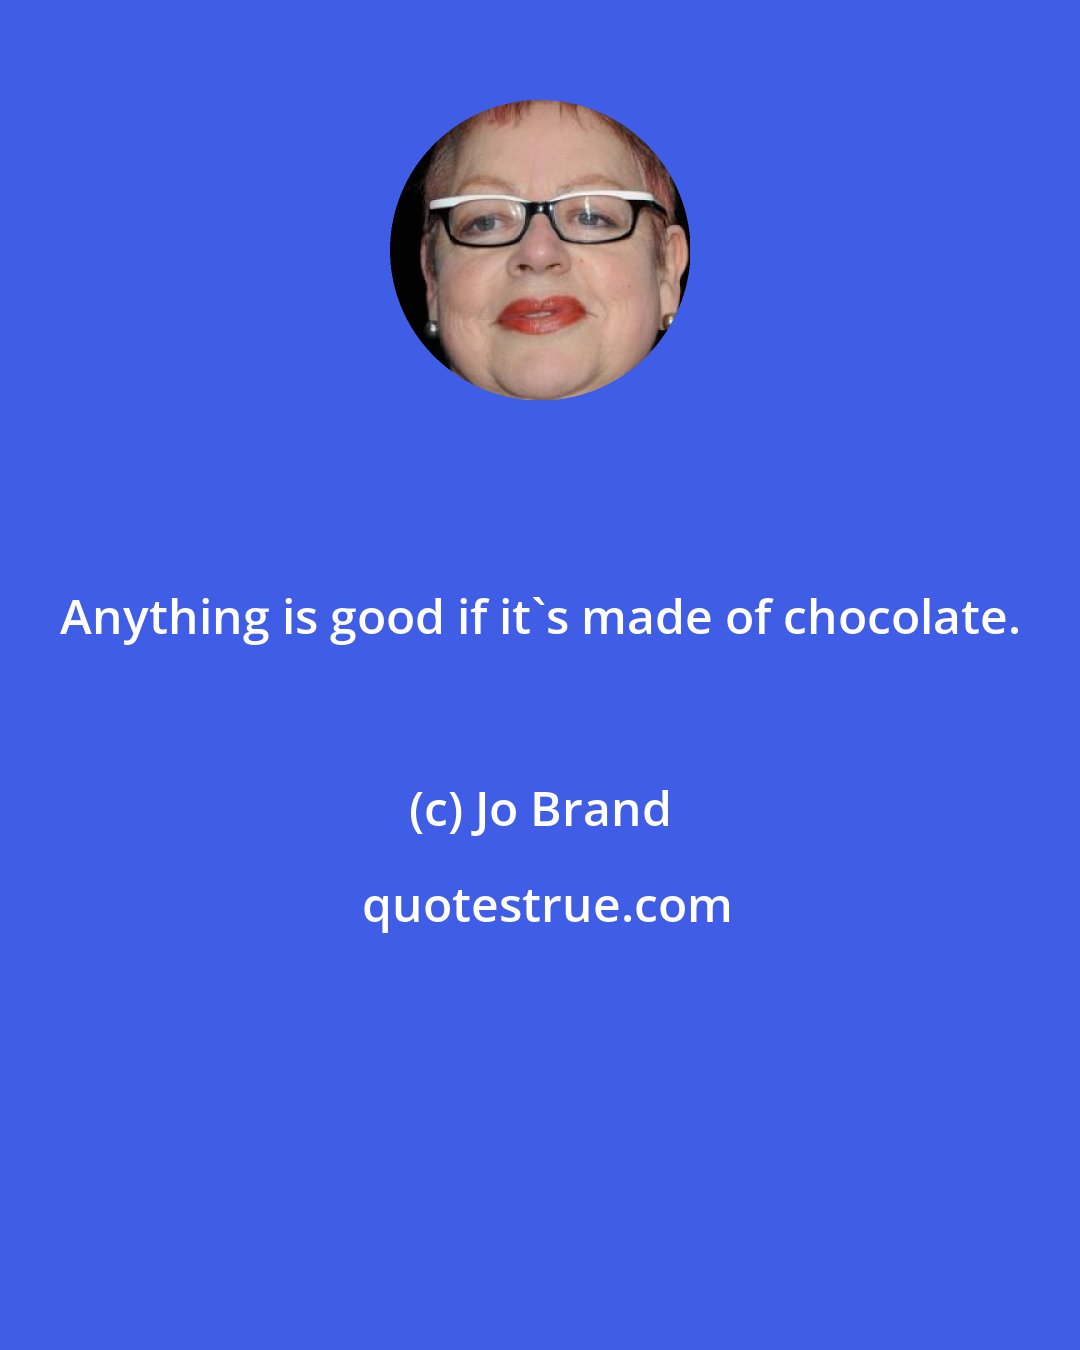 Jo Brand: Anything is good if it's made of chocolate.